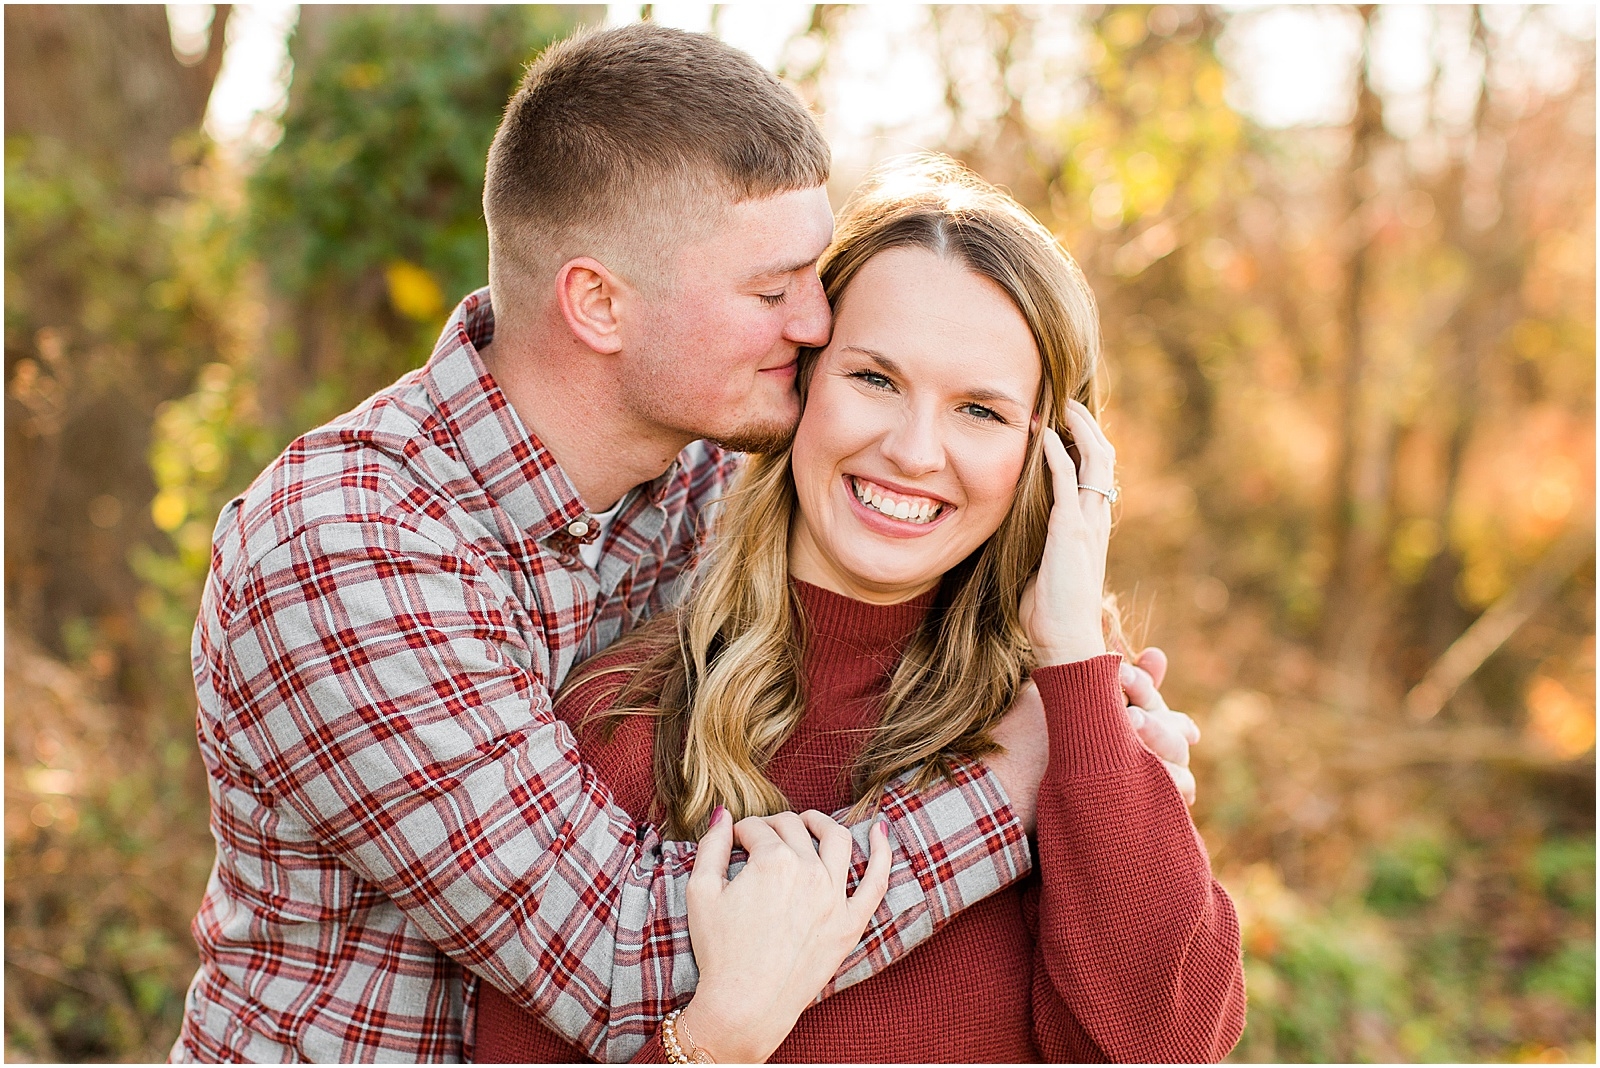 A Fall Southern Indiana Engagement Seesion | Cody and Hannah | Bret and Brandie Photography 020.jpg